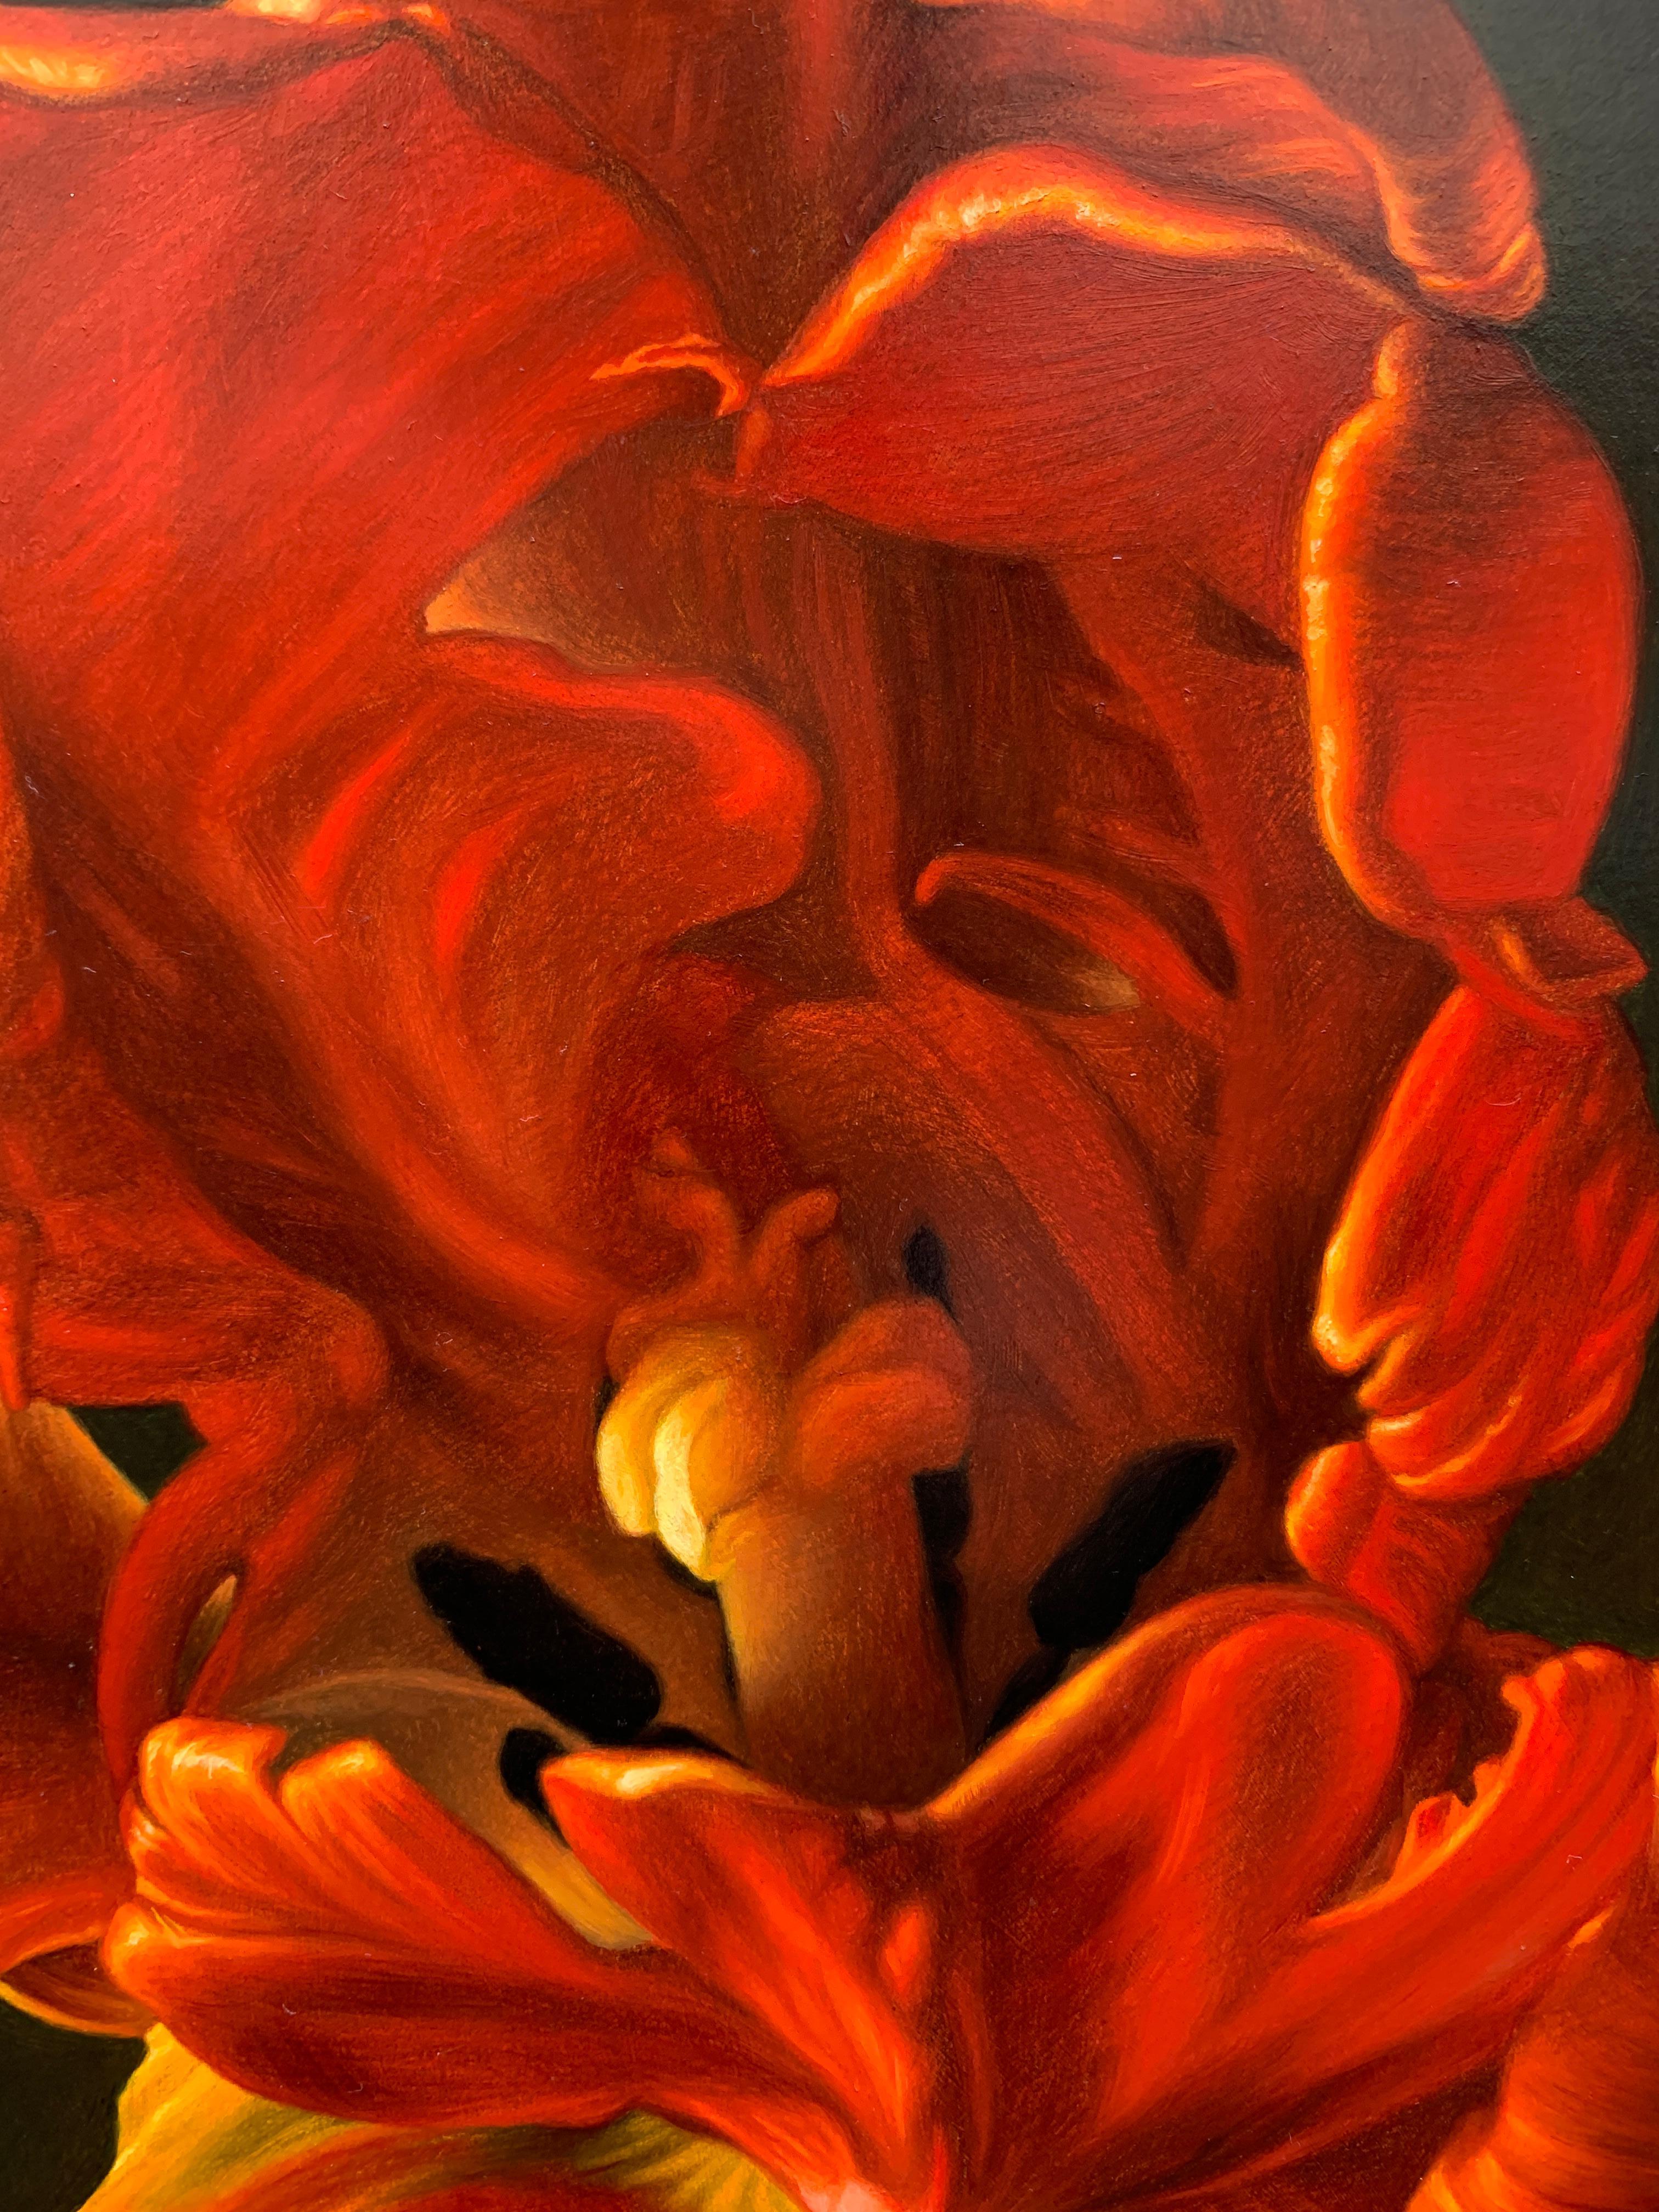 Red Tulip - Painting by Gianluca Corona